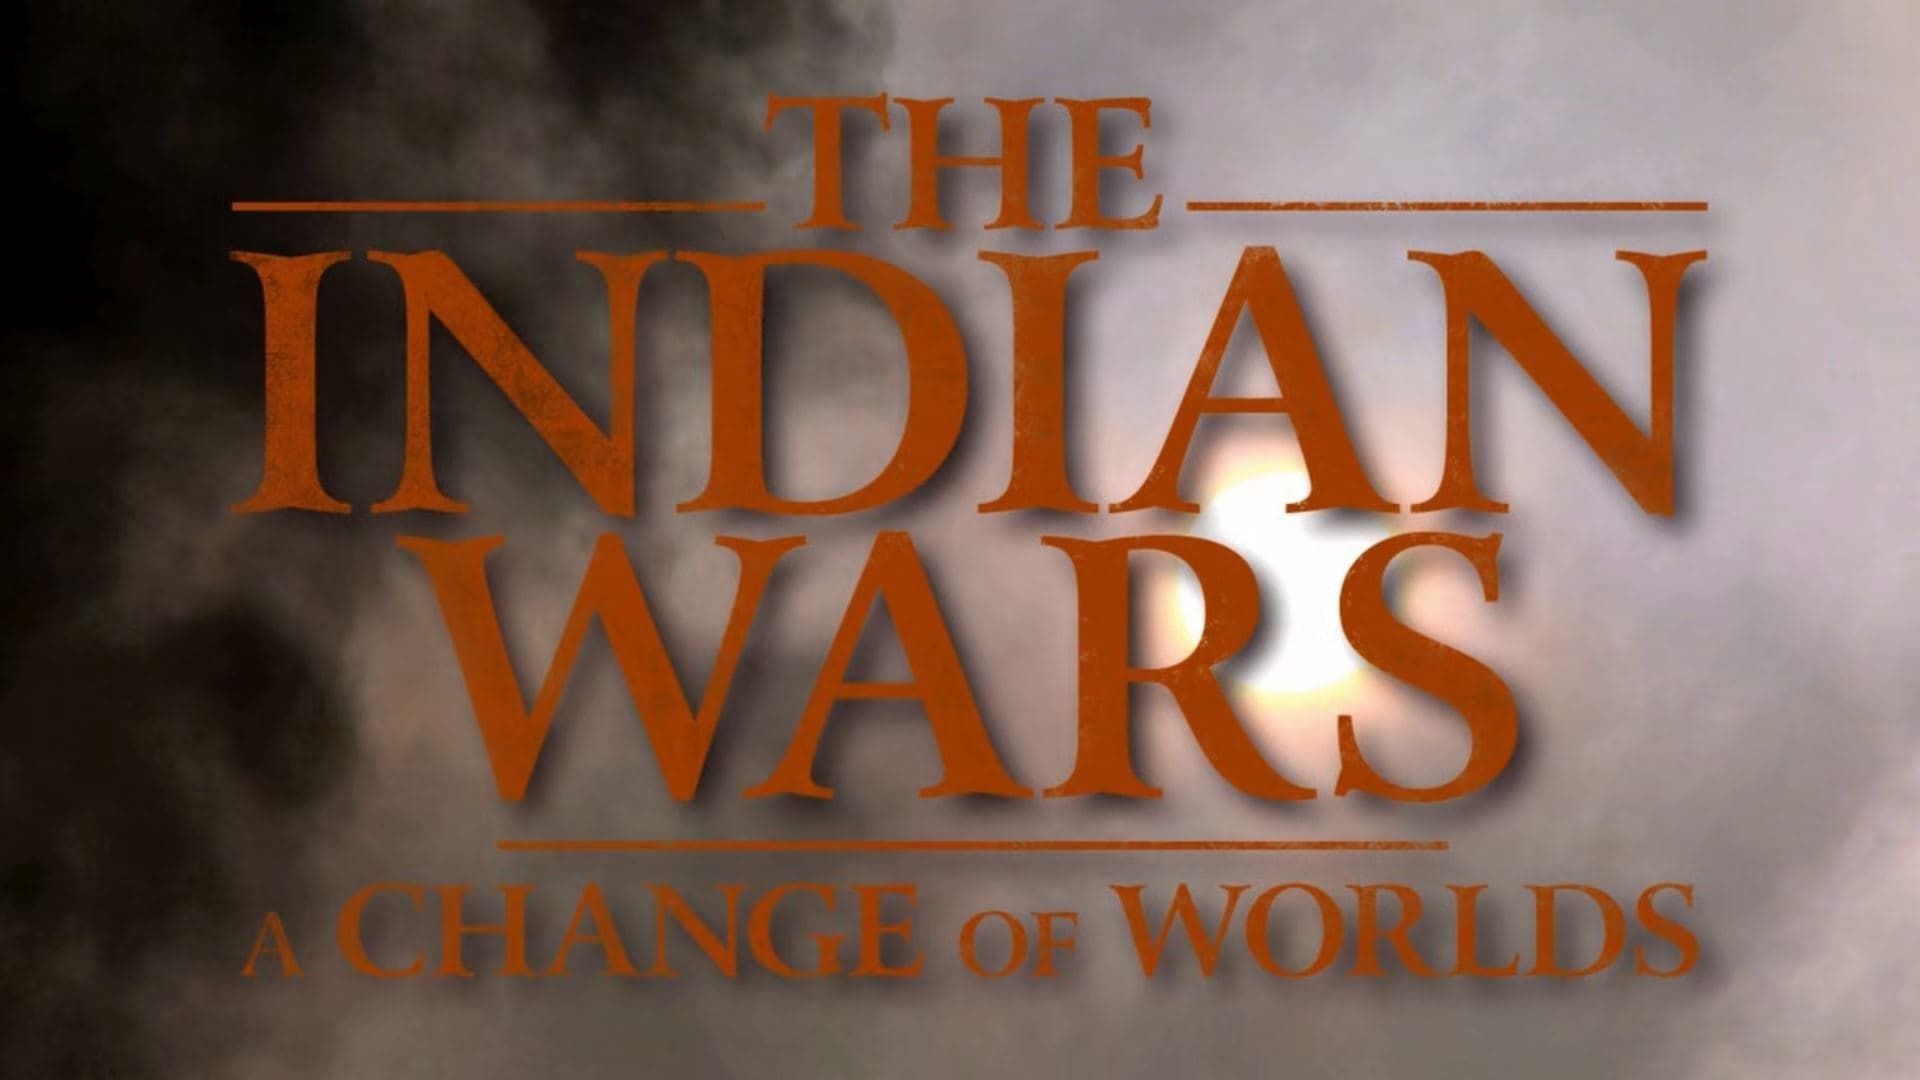 The Indian Wars: A Change of Worlds background